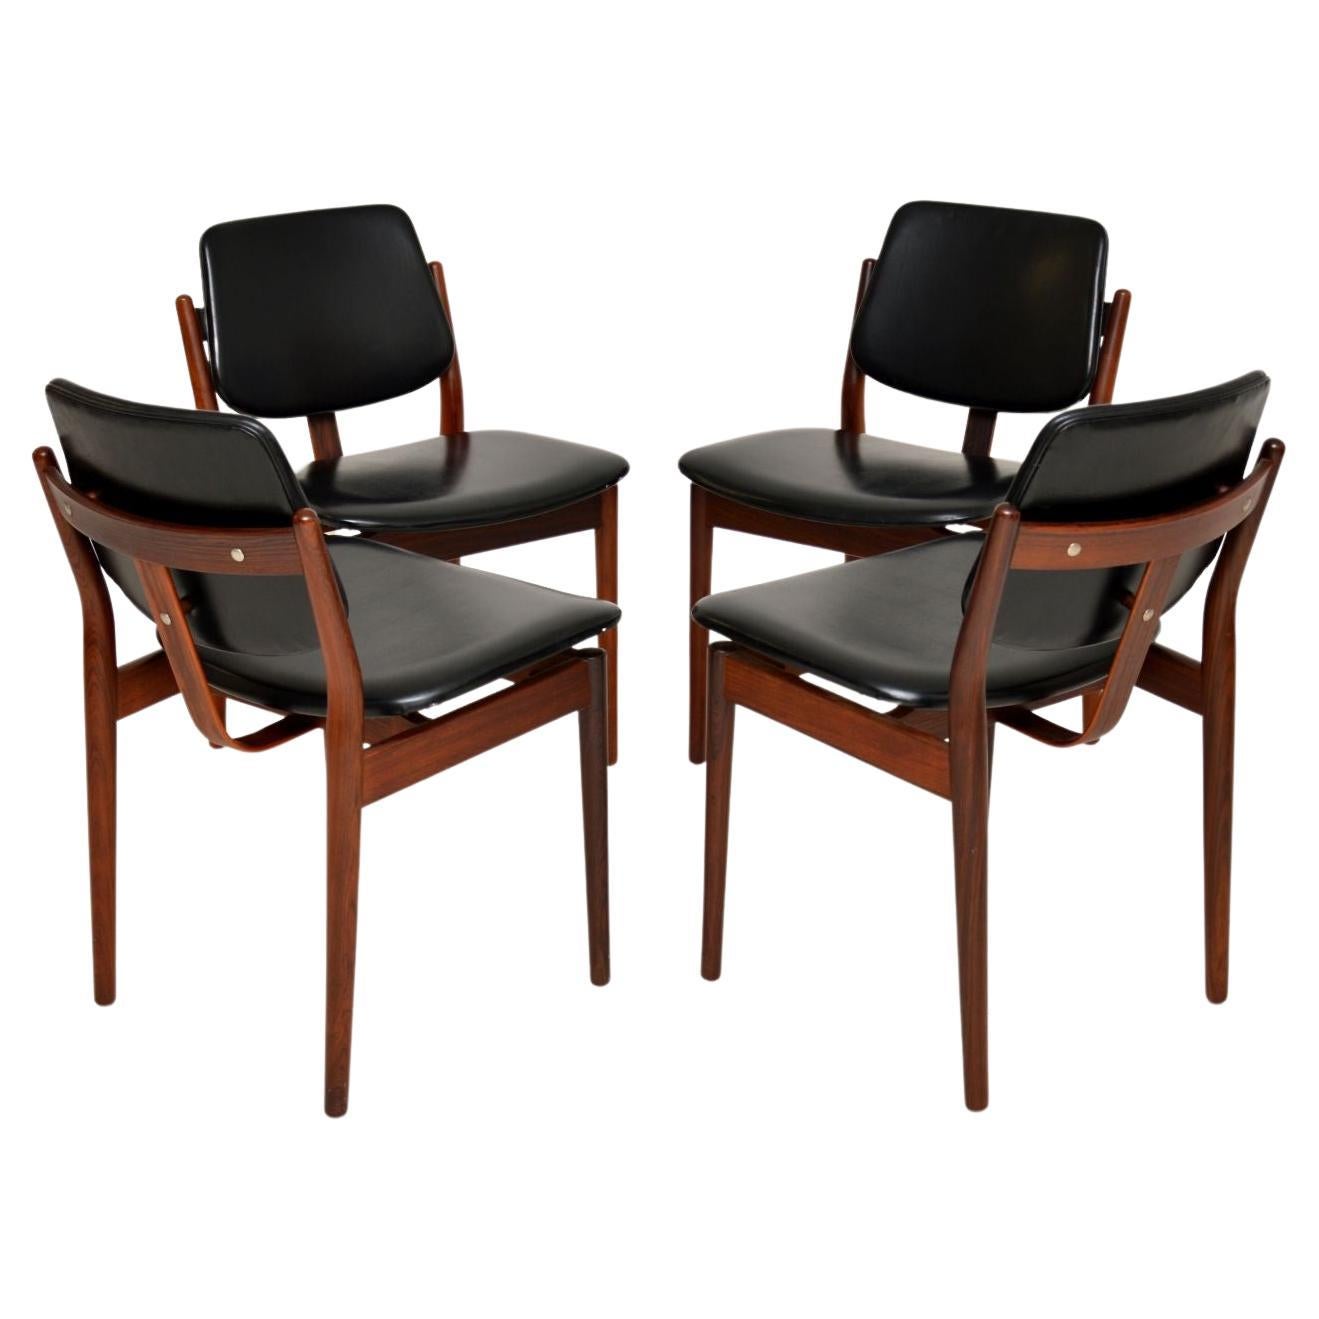 1960s Set of 4 Danish Dining Chairs by Borge Rammeskov for Sibast